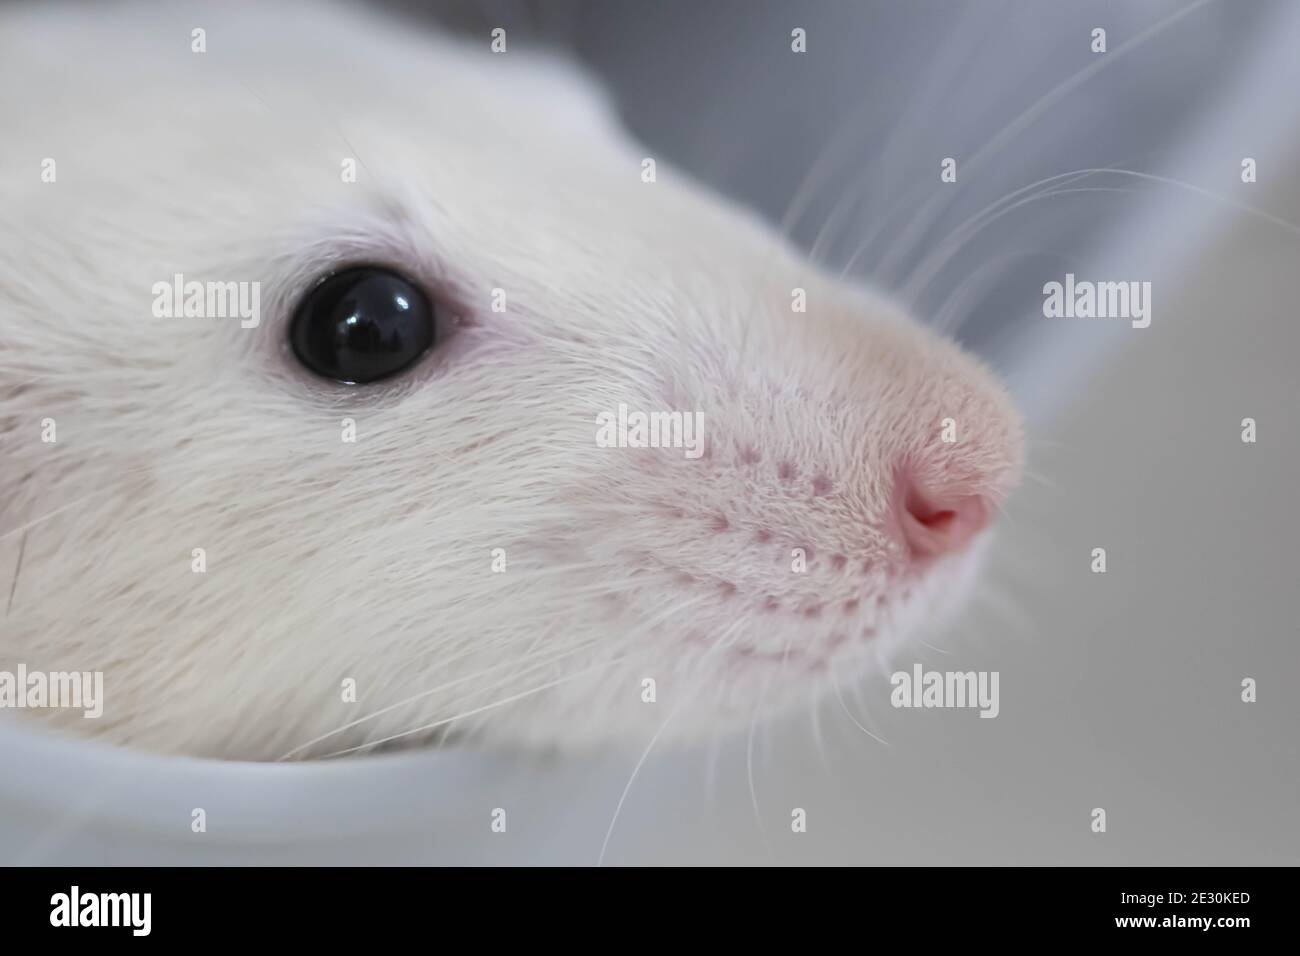 White muzzle of a decorative rat close-up. Lovely pet. Macro photograph of a pink nose and a long mustache. Rat portrait Stock Photo